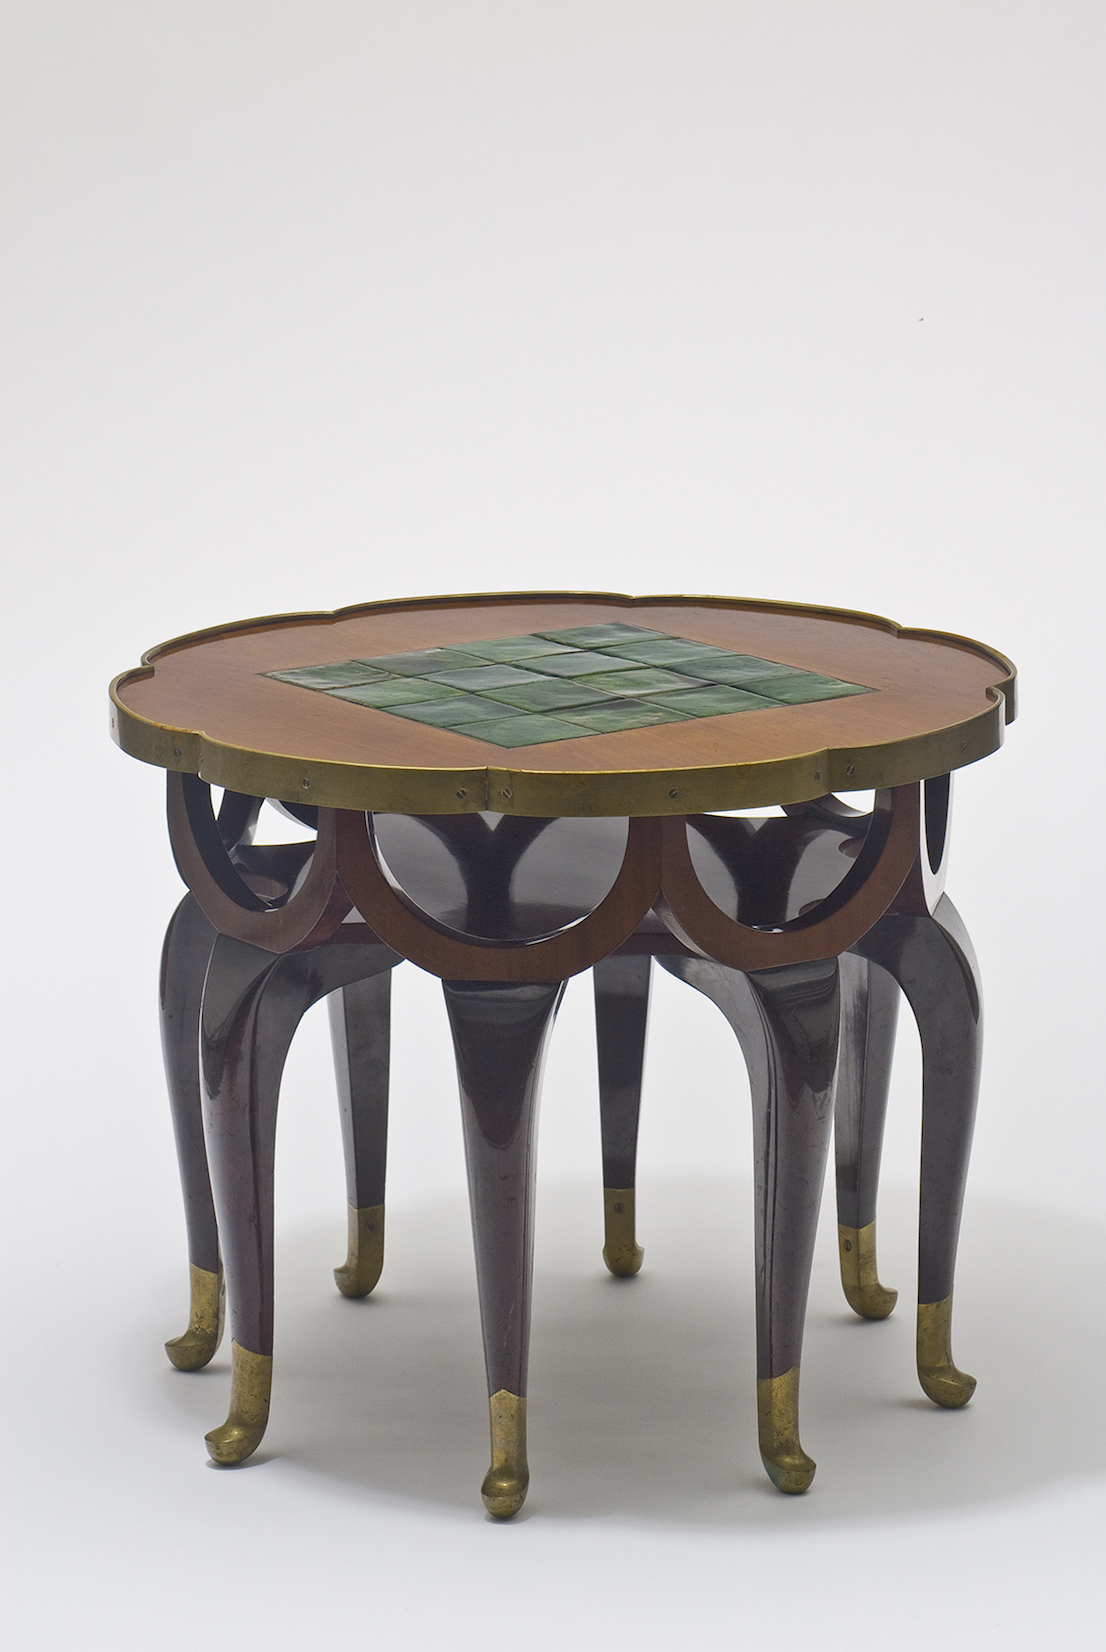 Max Schmidt and foreman Berka table for the Turnowsky apartment decorated by Adolf Loos, 1900 © MAK/Georg Mayer